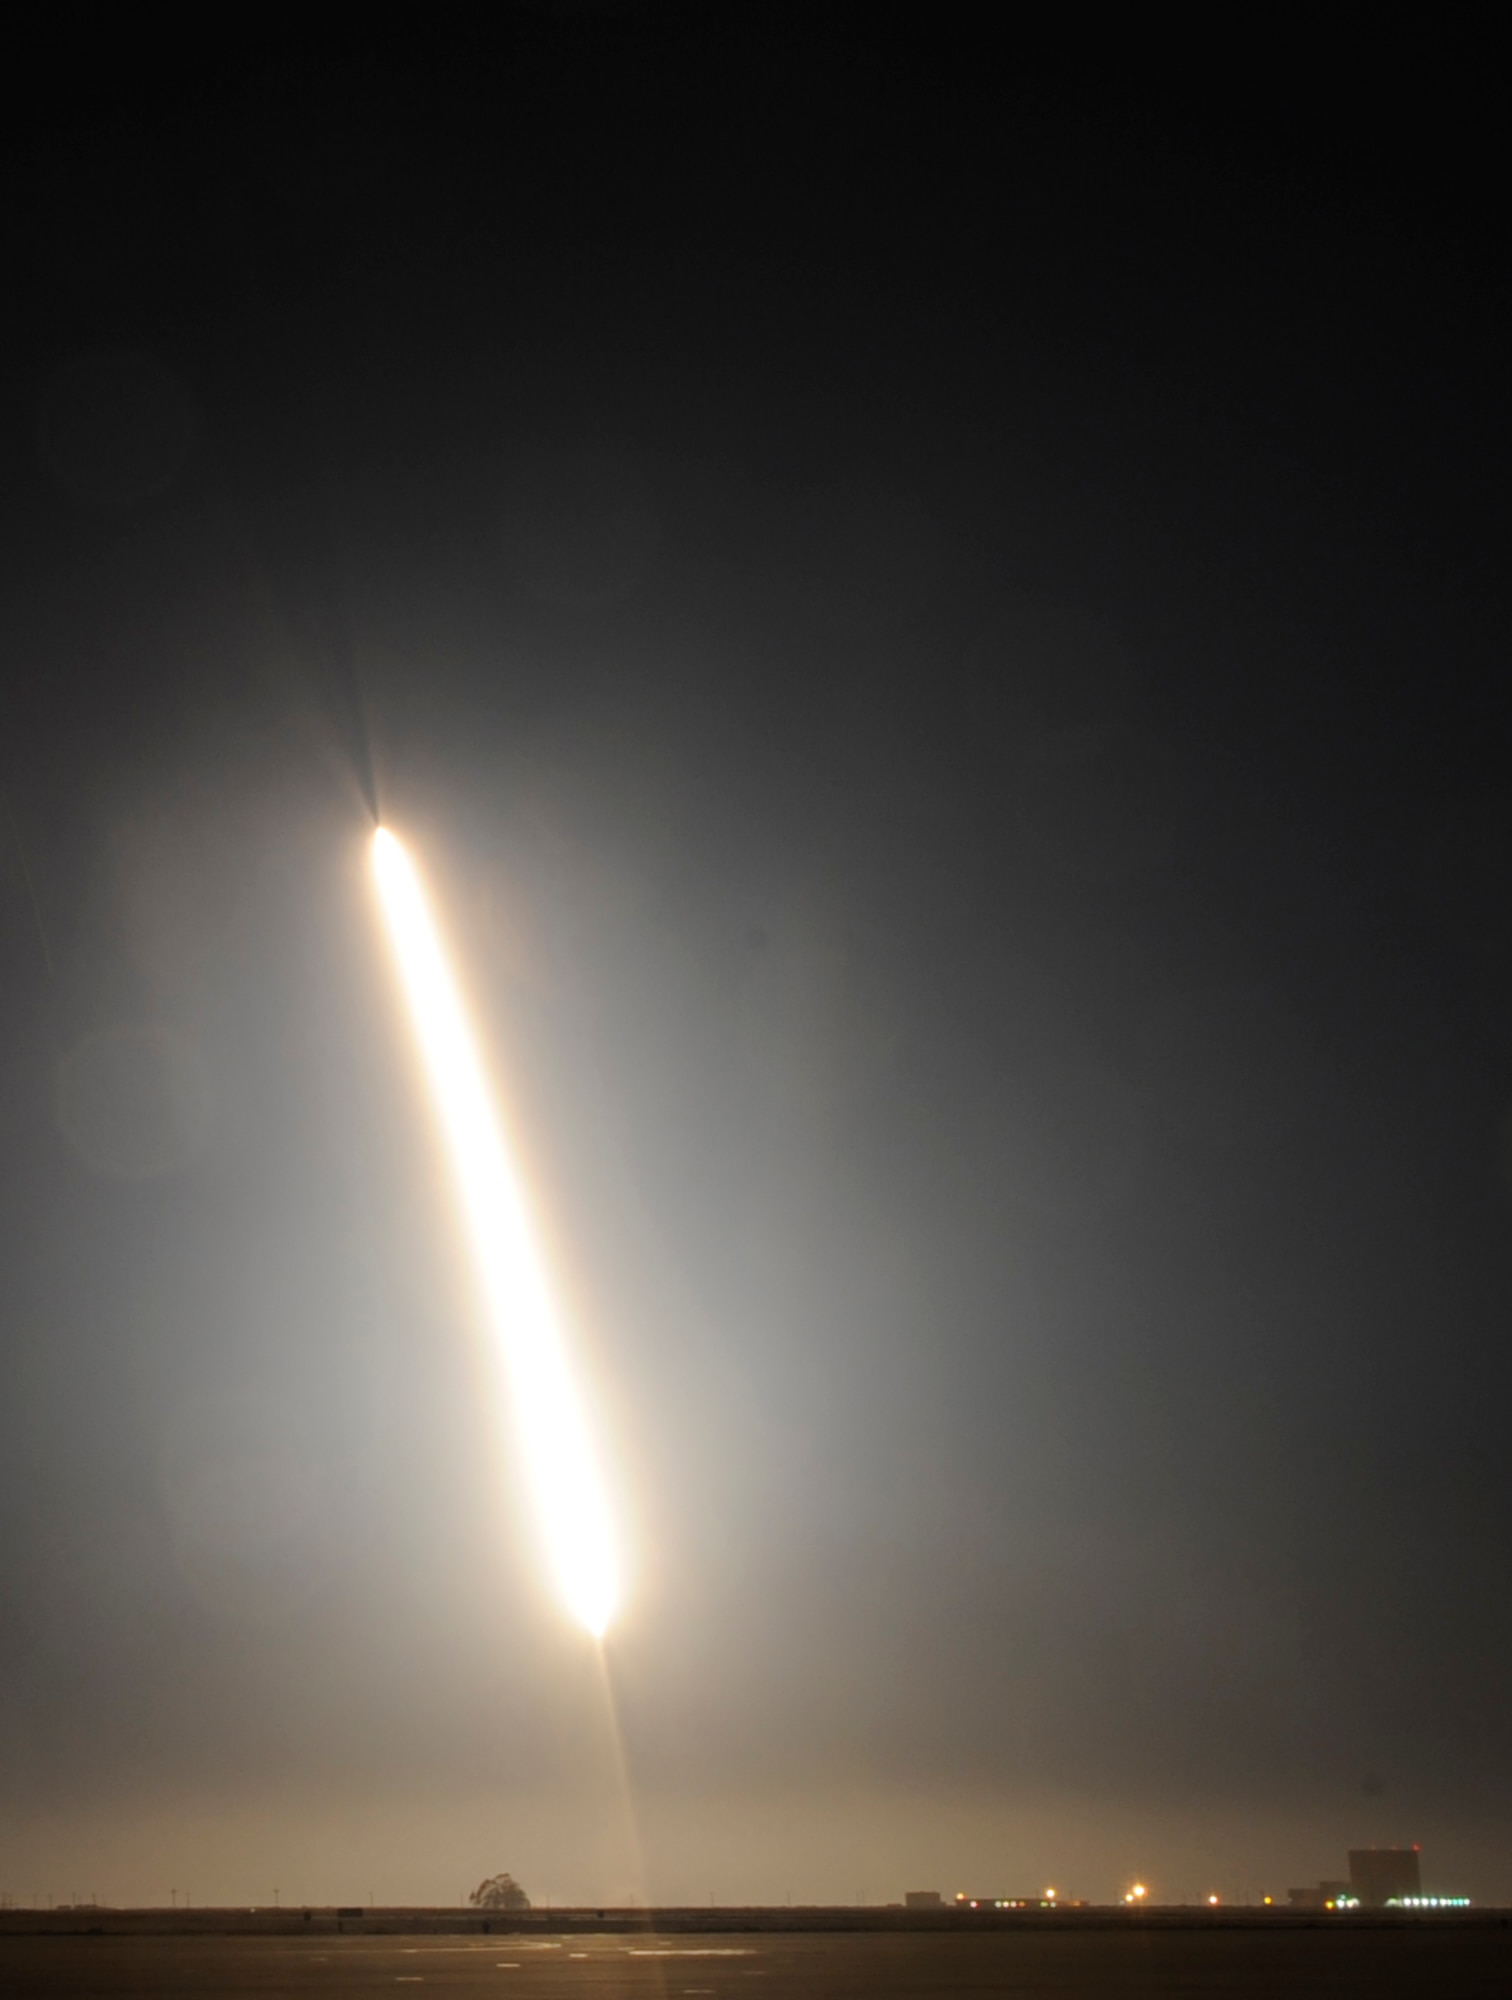 VANDENBERG AIR FORCE BASE, Calif. – An Orbital Sciences Corporation Taurus XL rocket carrying NASA’s Glory spacecraft launched from Space Launch Complex 576-E here at 2:09 a.m. (PST) March 4. (U.S. Air Force photo/Senior Airman Lael Huss) 